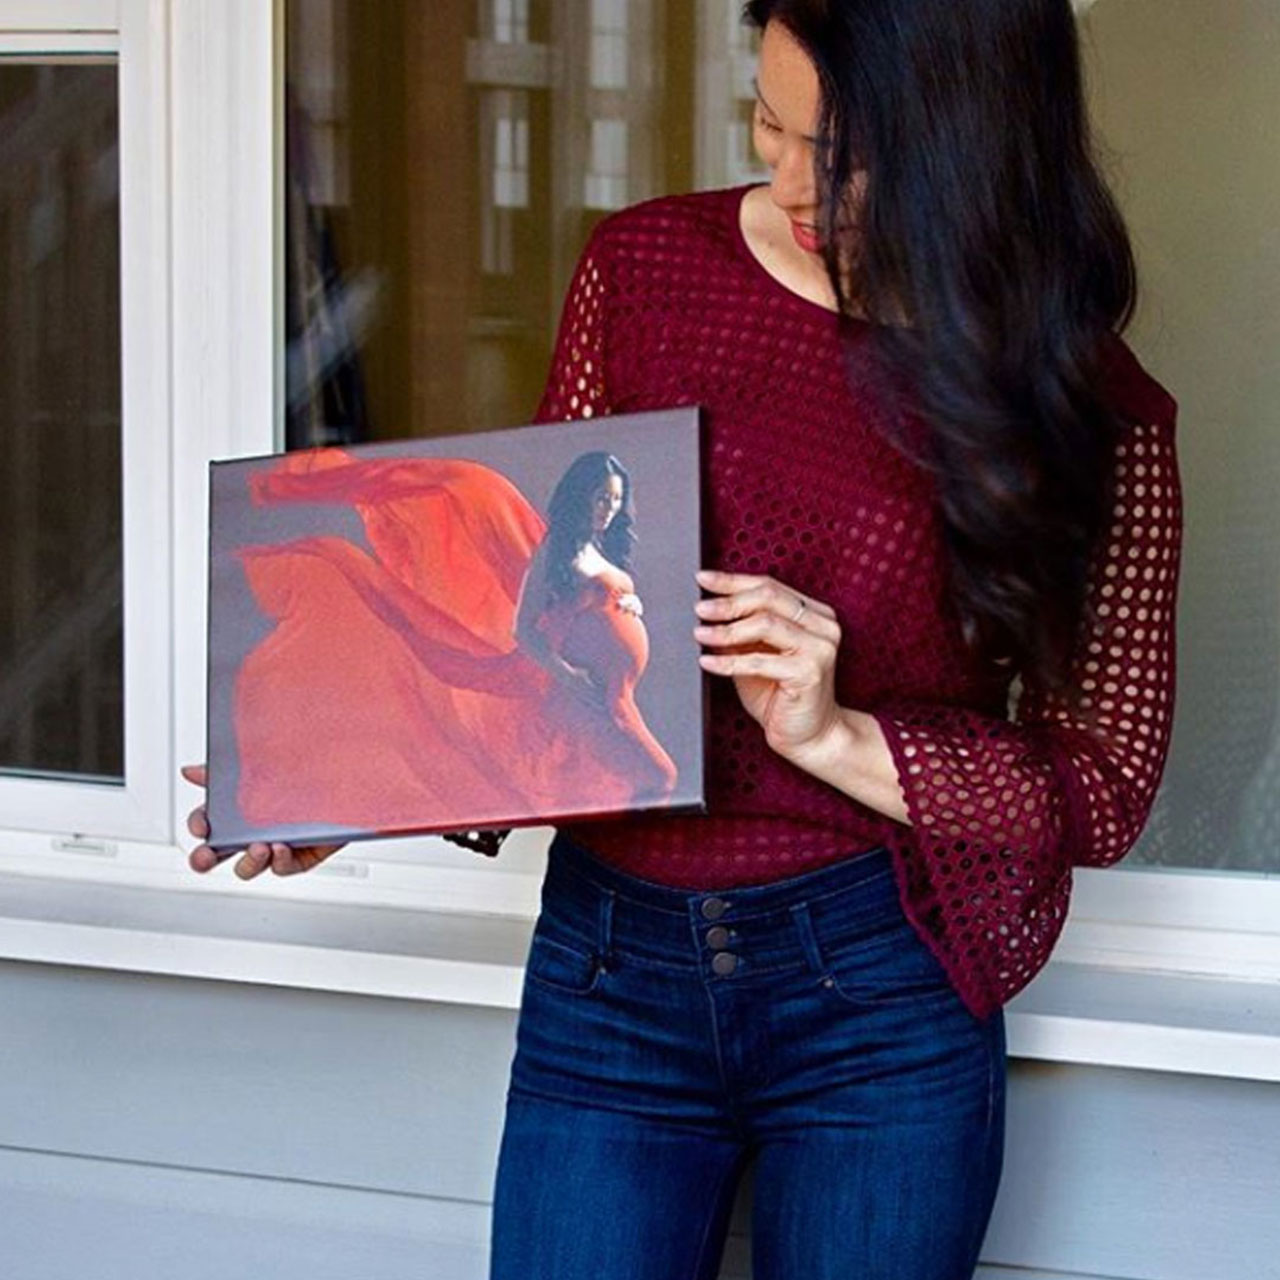 Woman holds a custom canvas that depicts a photo of herself posing in a red dress